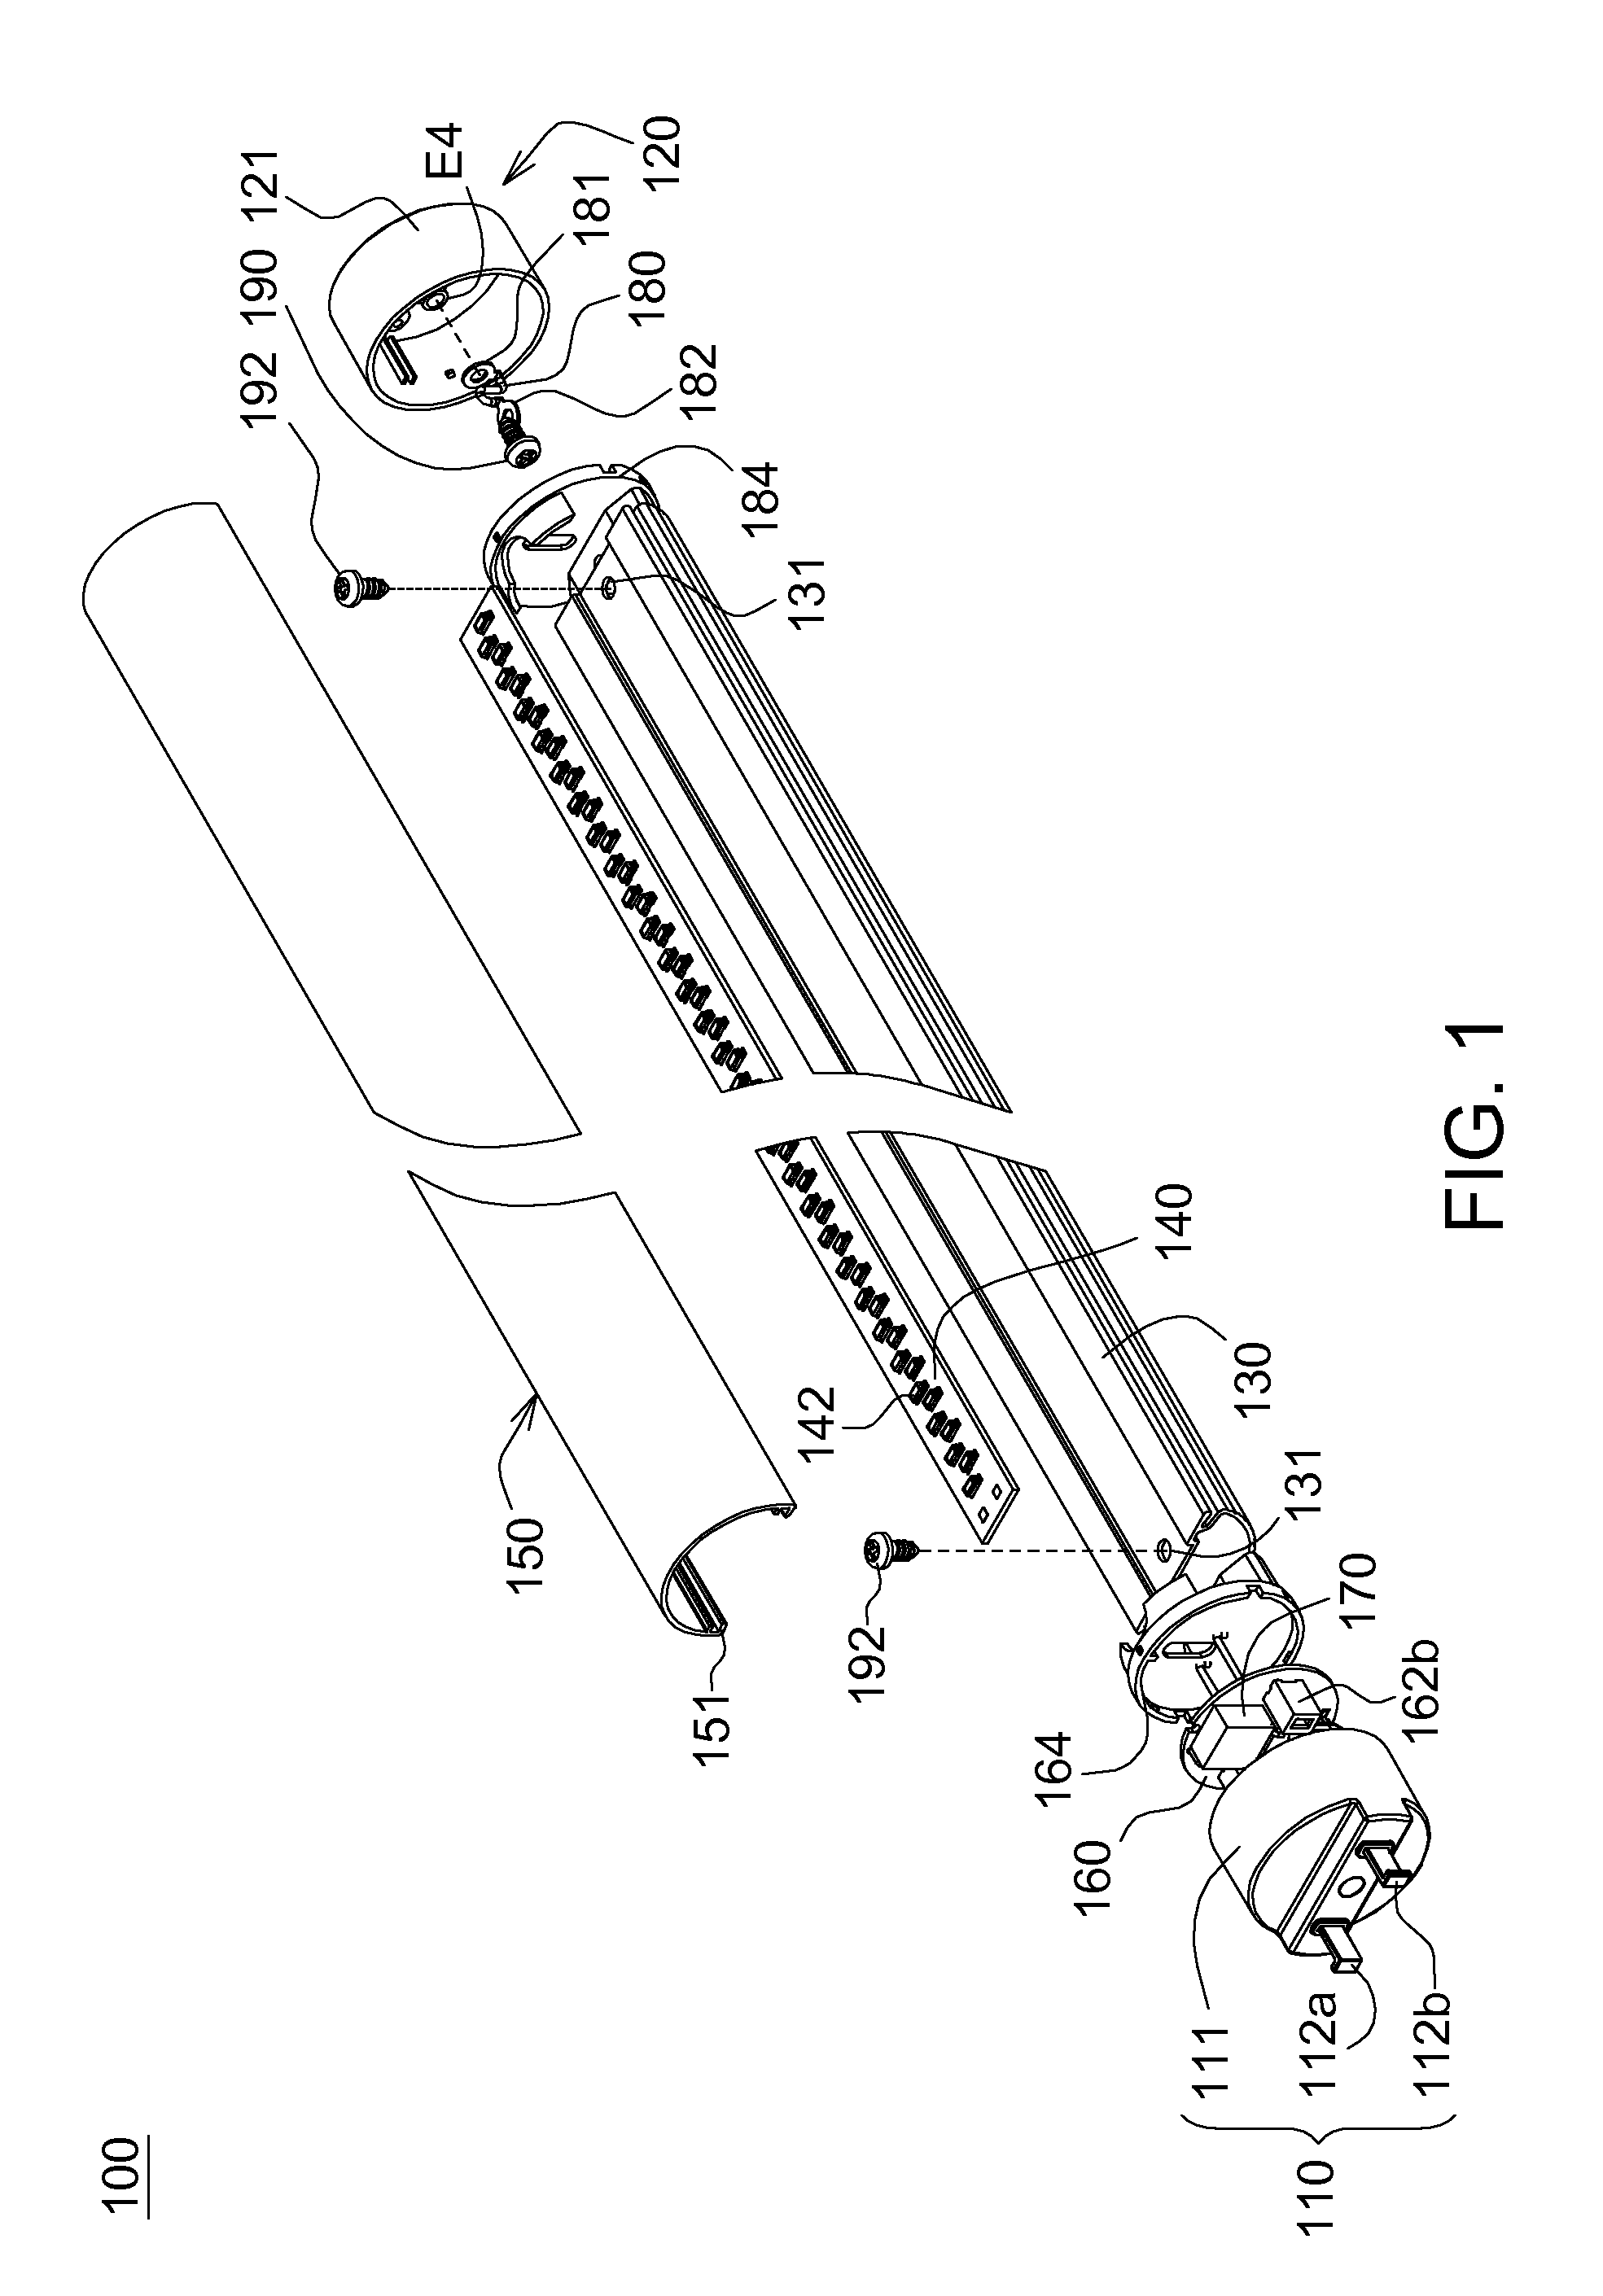 Lamp tube structure and assembly thereof